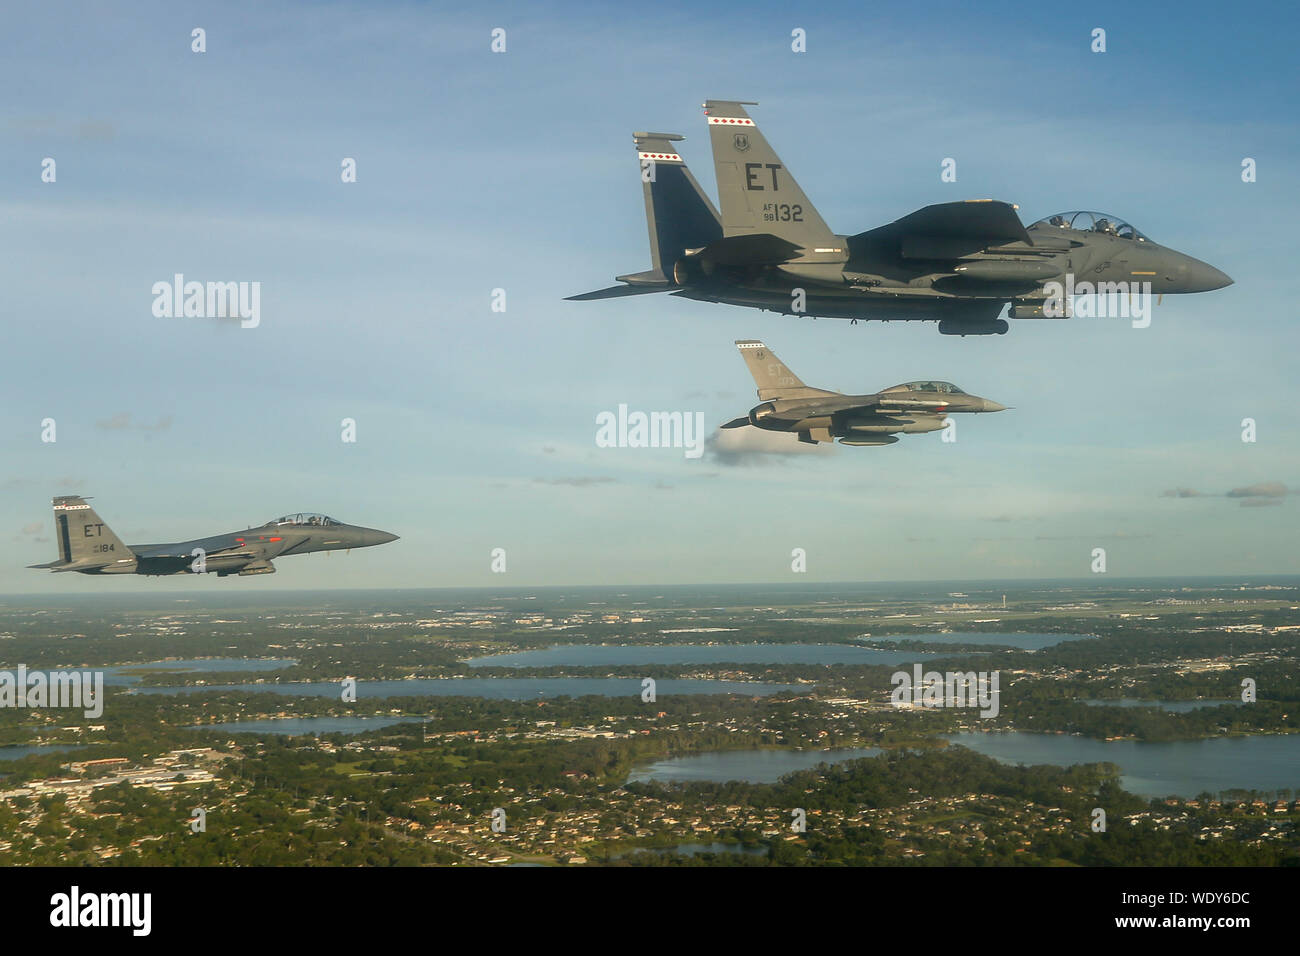 Two F-16D Fighting Falcons and two F-15E Strike Eagles from the 96th Test Wing, Eglin AFB, Fla., perform a formation flyover of the National Collegiate Athletic Association football season opener in Orlando, Fla., Aug 24, 2019. The Miami Hurricanes played against the Florida Gators during the first football game of the 2019 season. (U.S. Air Force photo by SrA Joshua Hoskins) Stock Photo